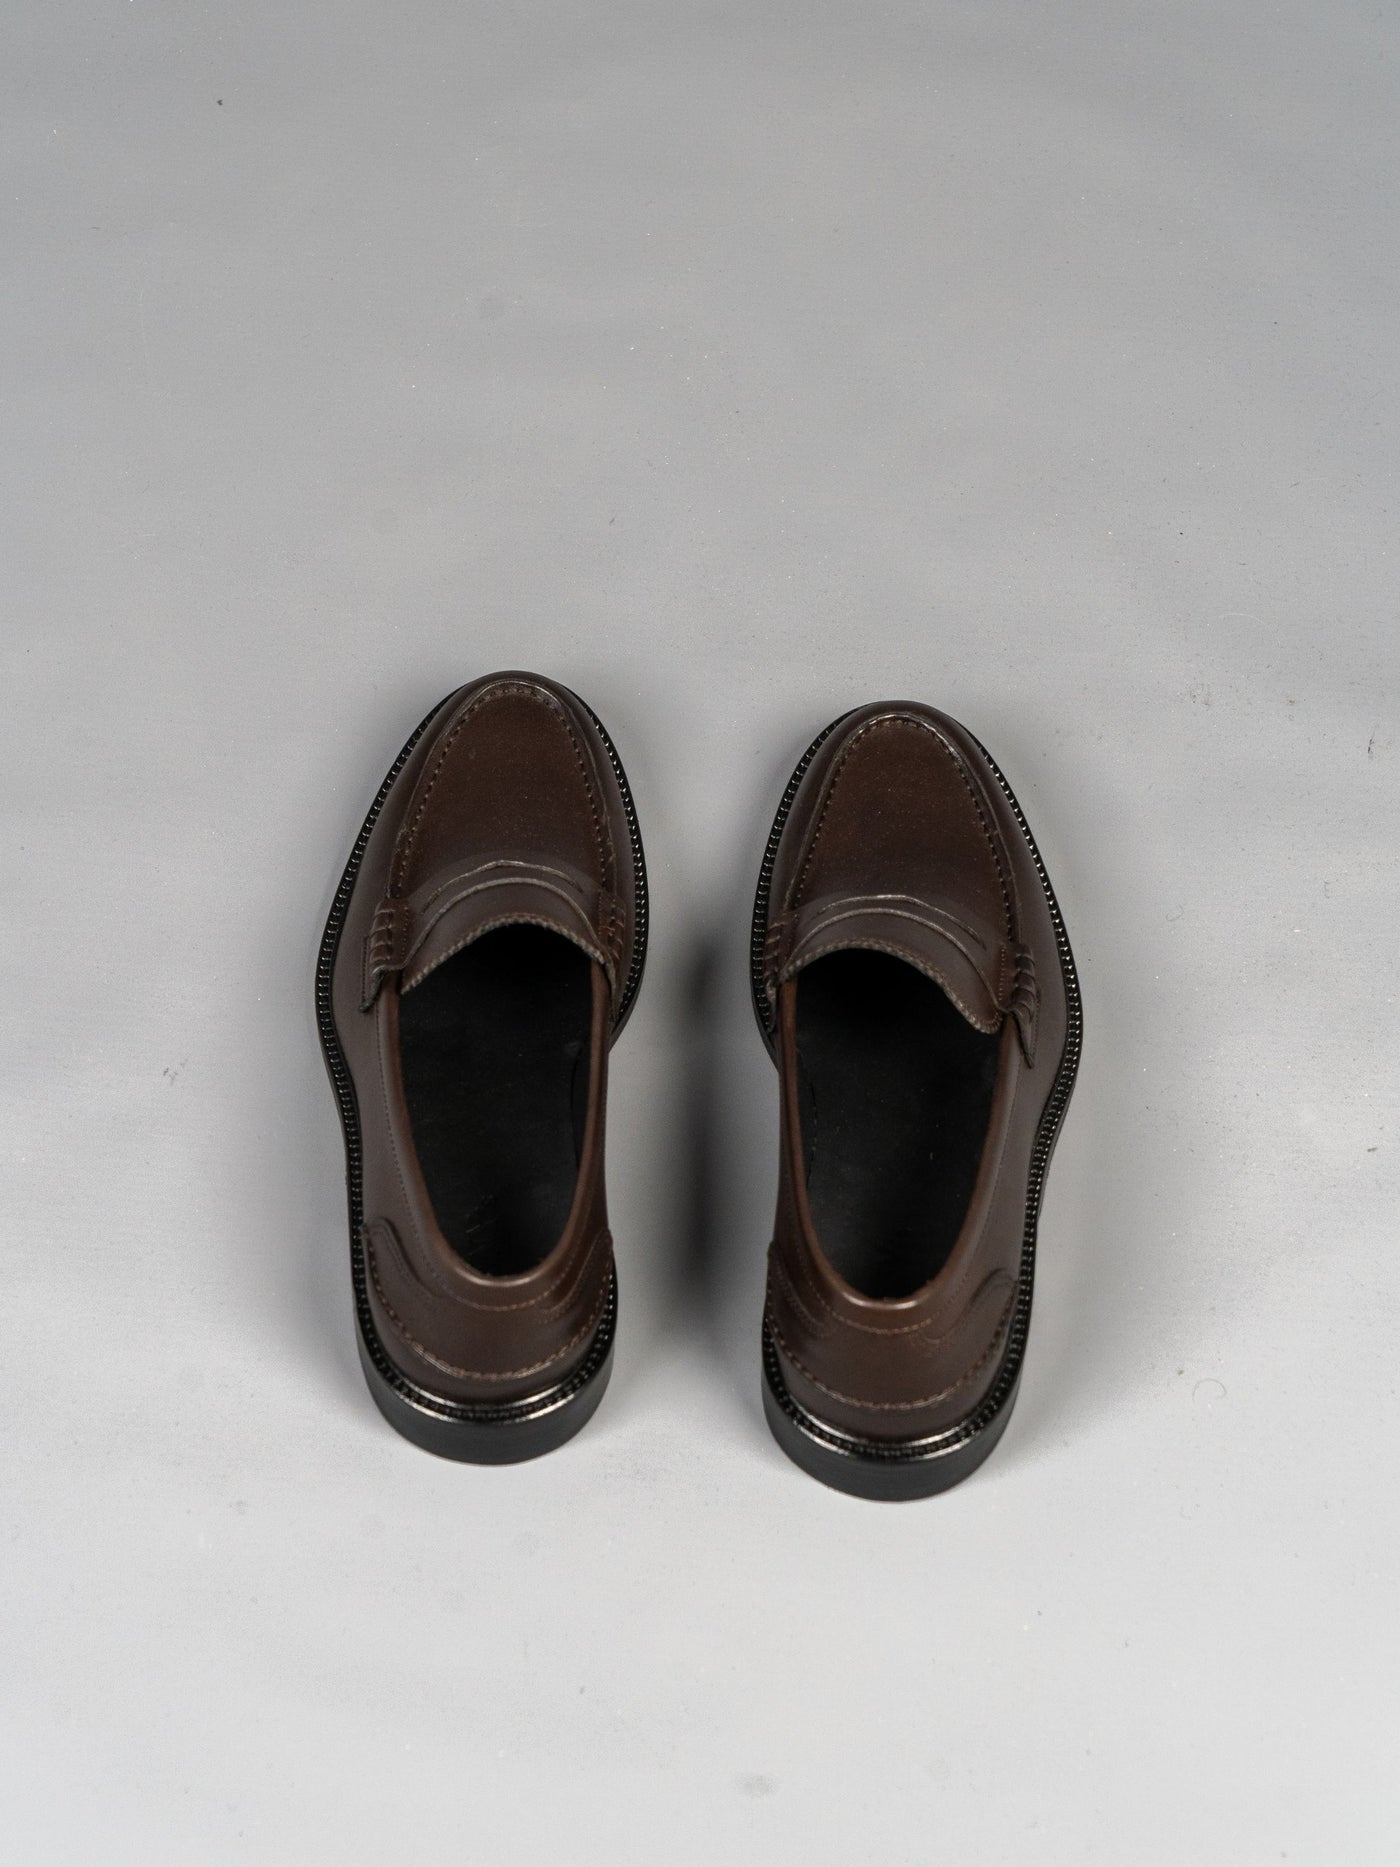 Townee Penny Loafer - Brun